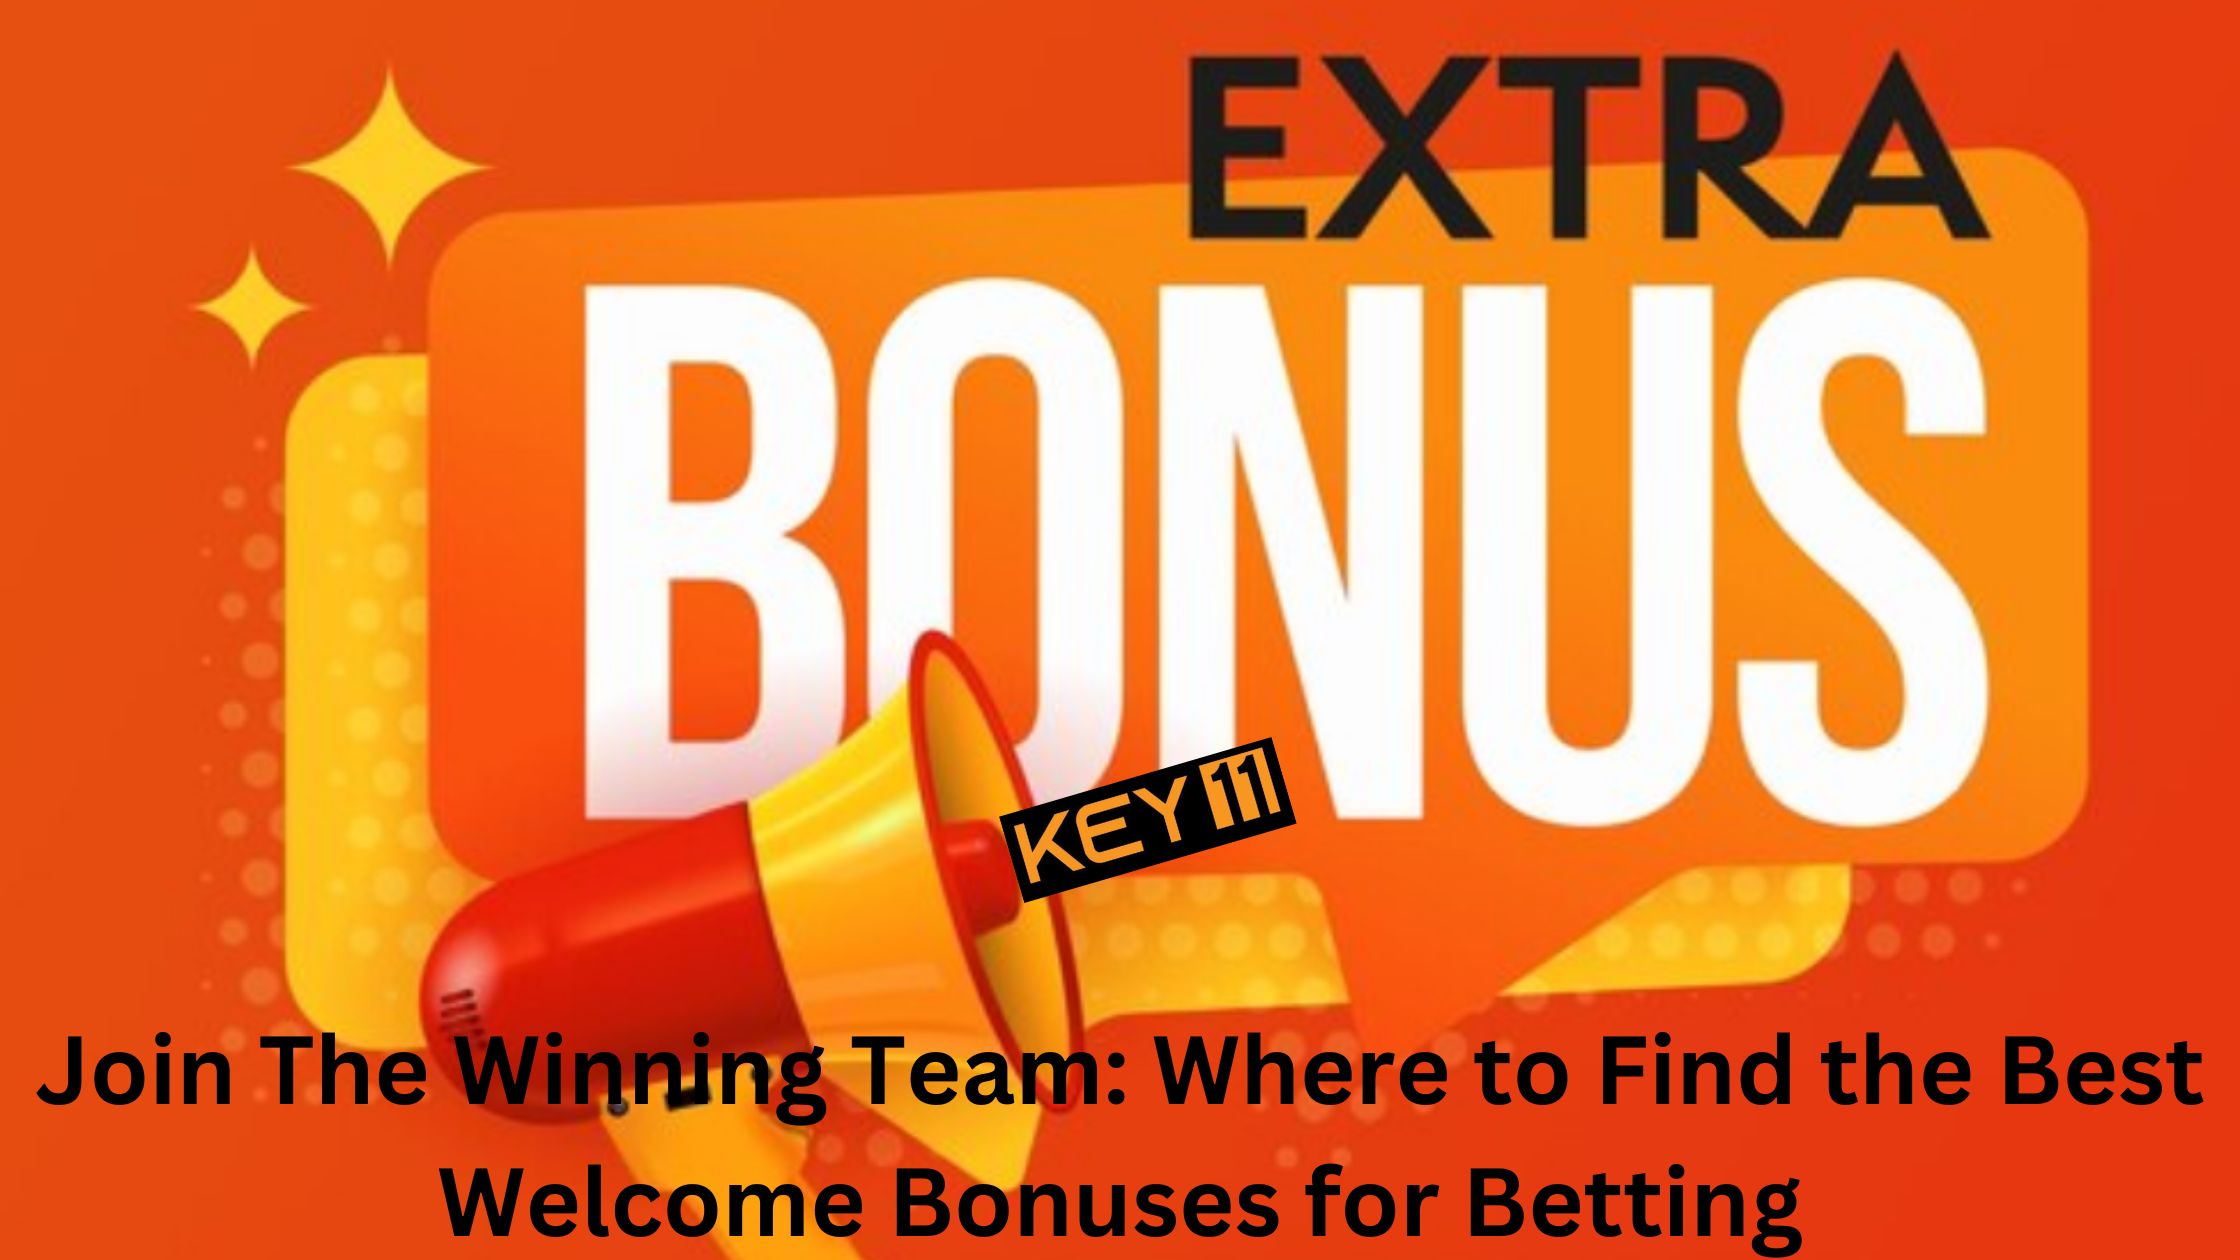 Where to Find the Best Welcome Bonuses for Betting- Key11.io